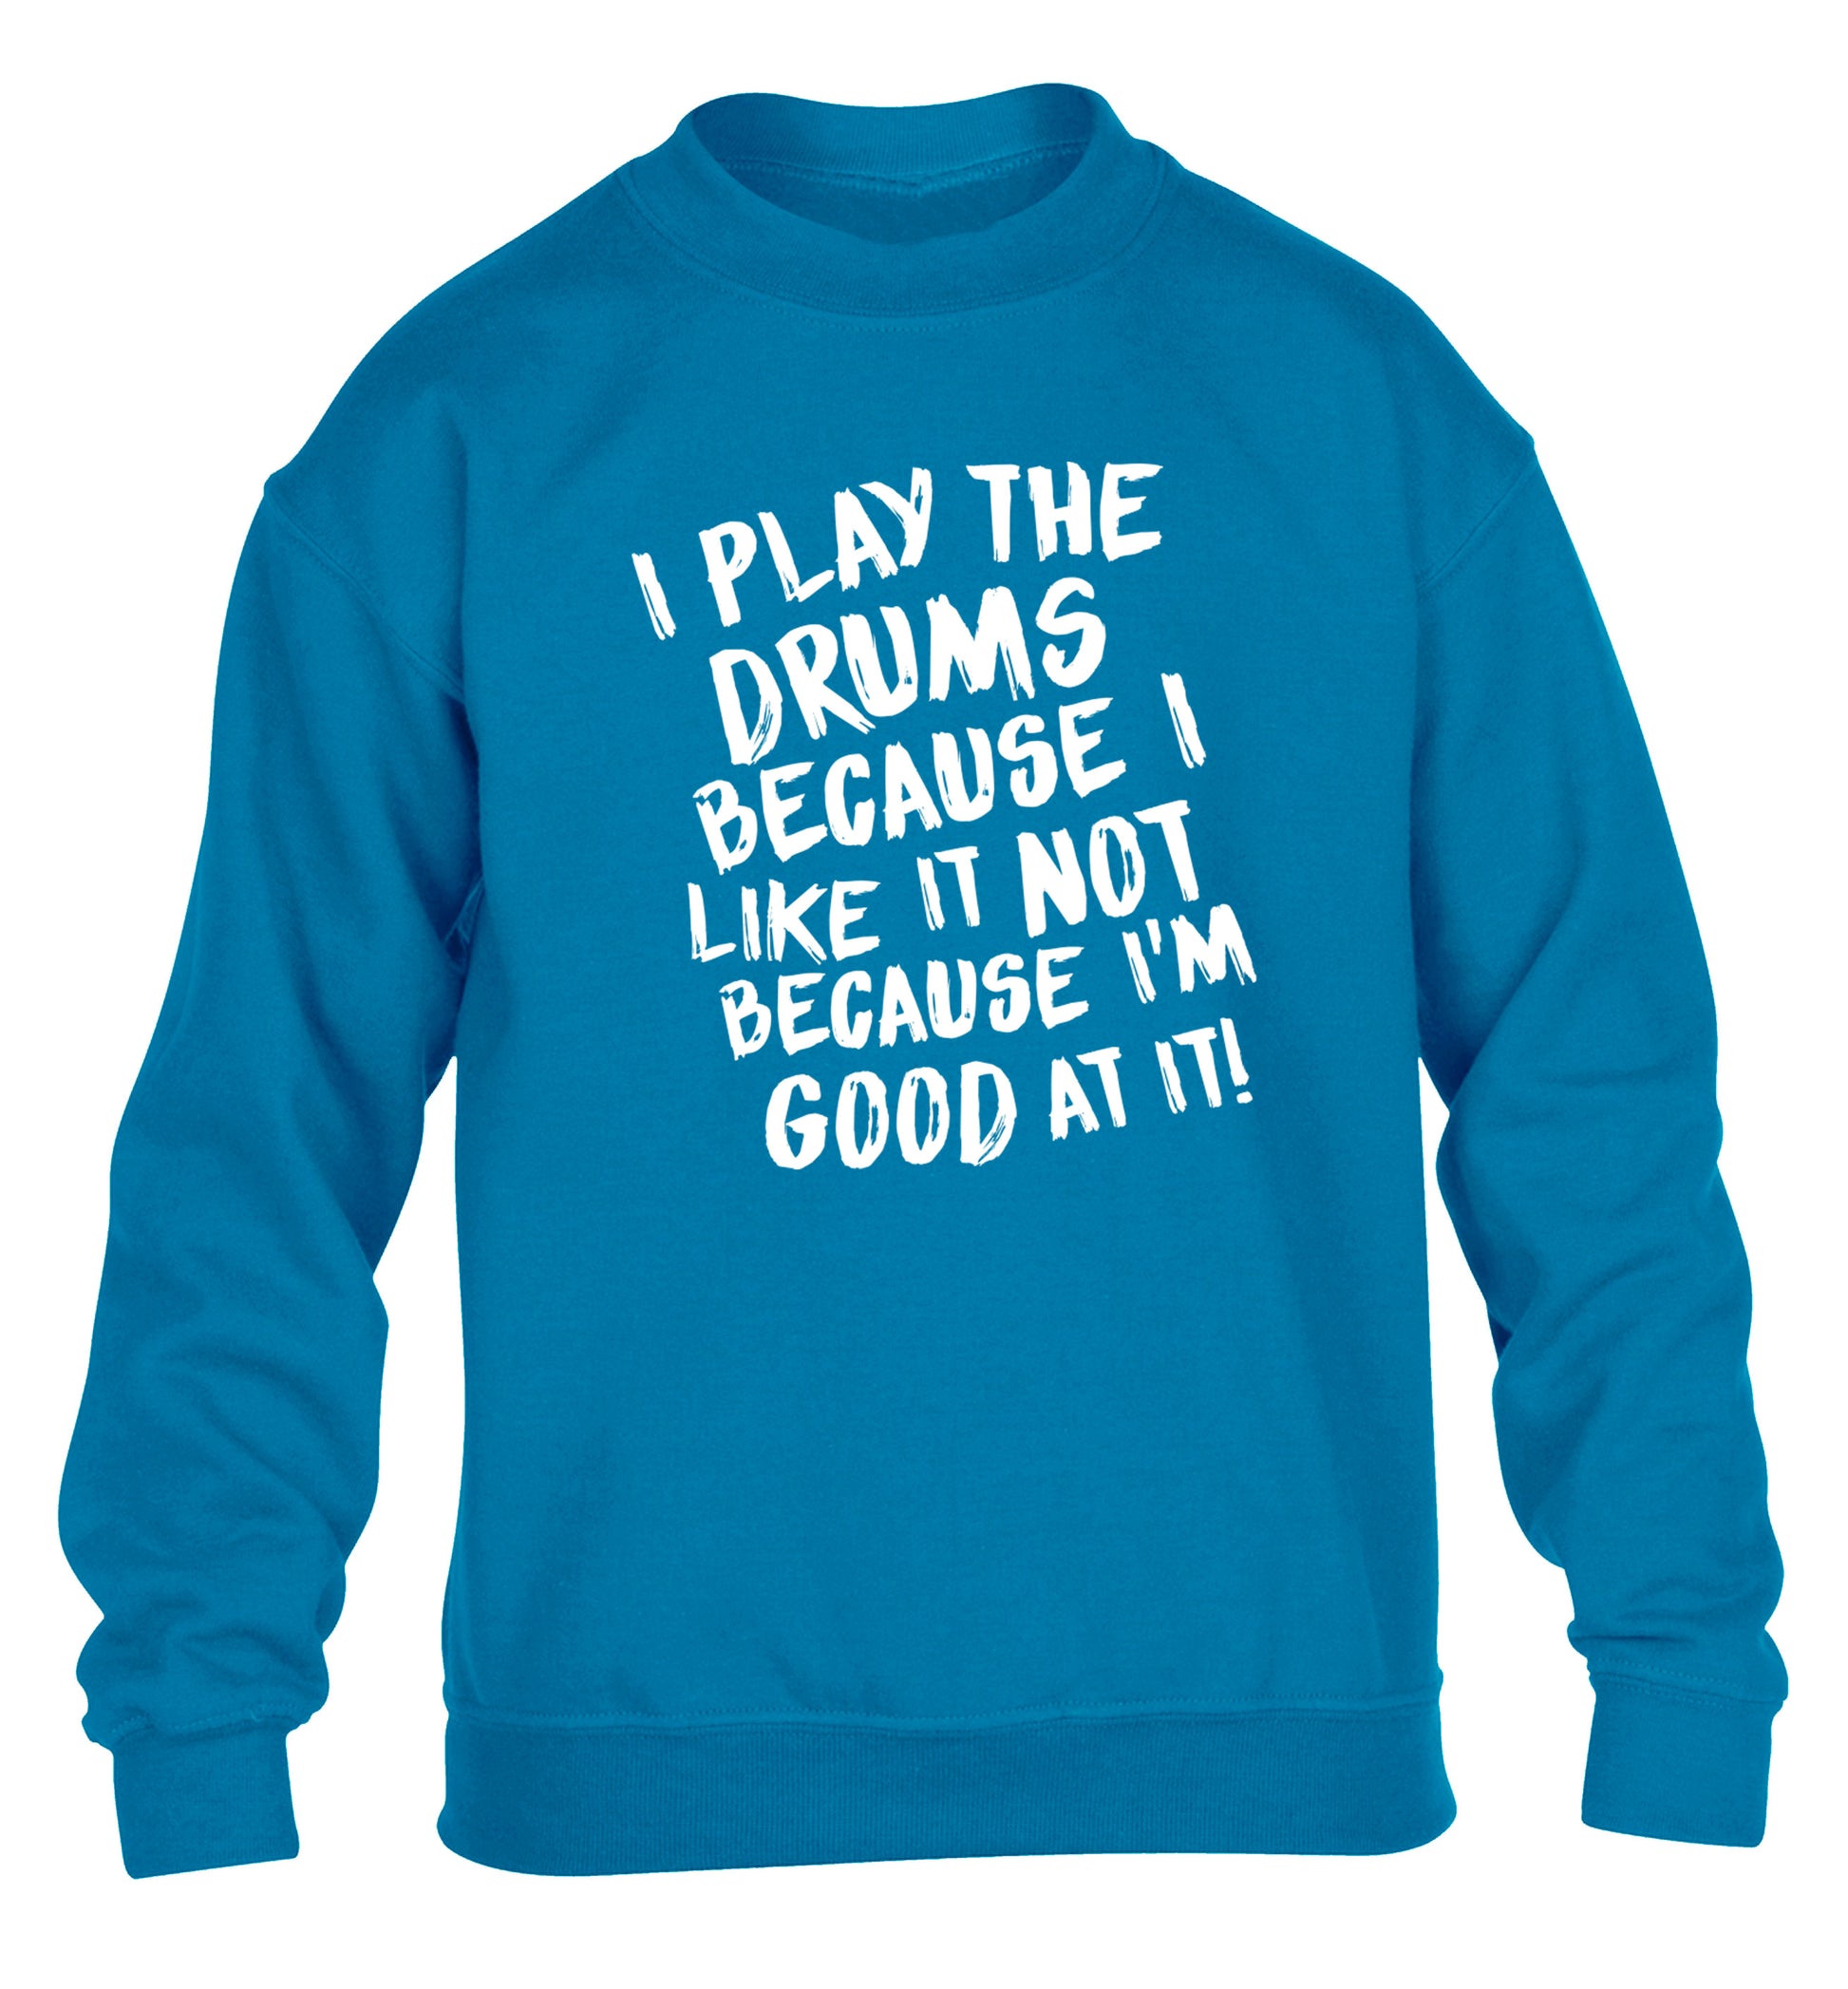 I play the drums because I like it not because I'm good at it children's blue sweater 12-14 Years